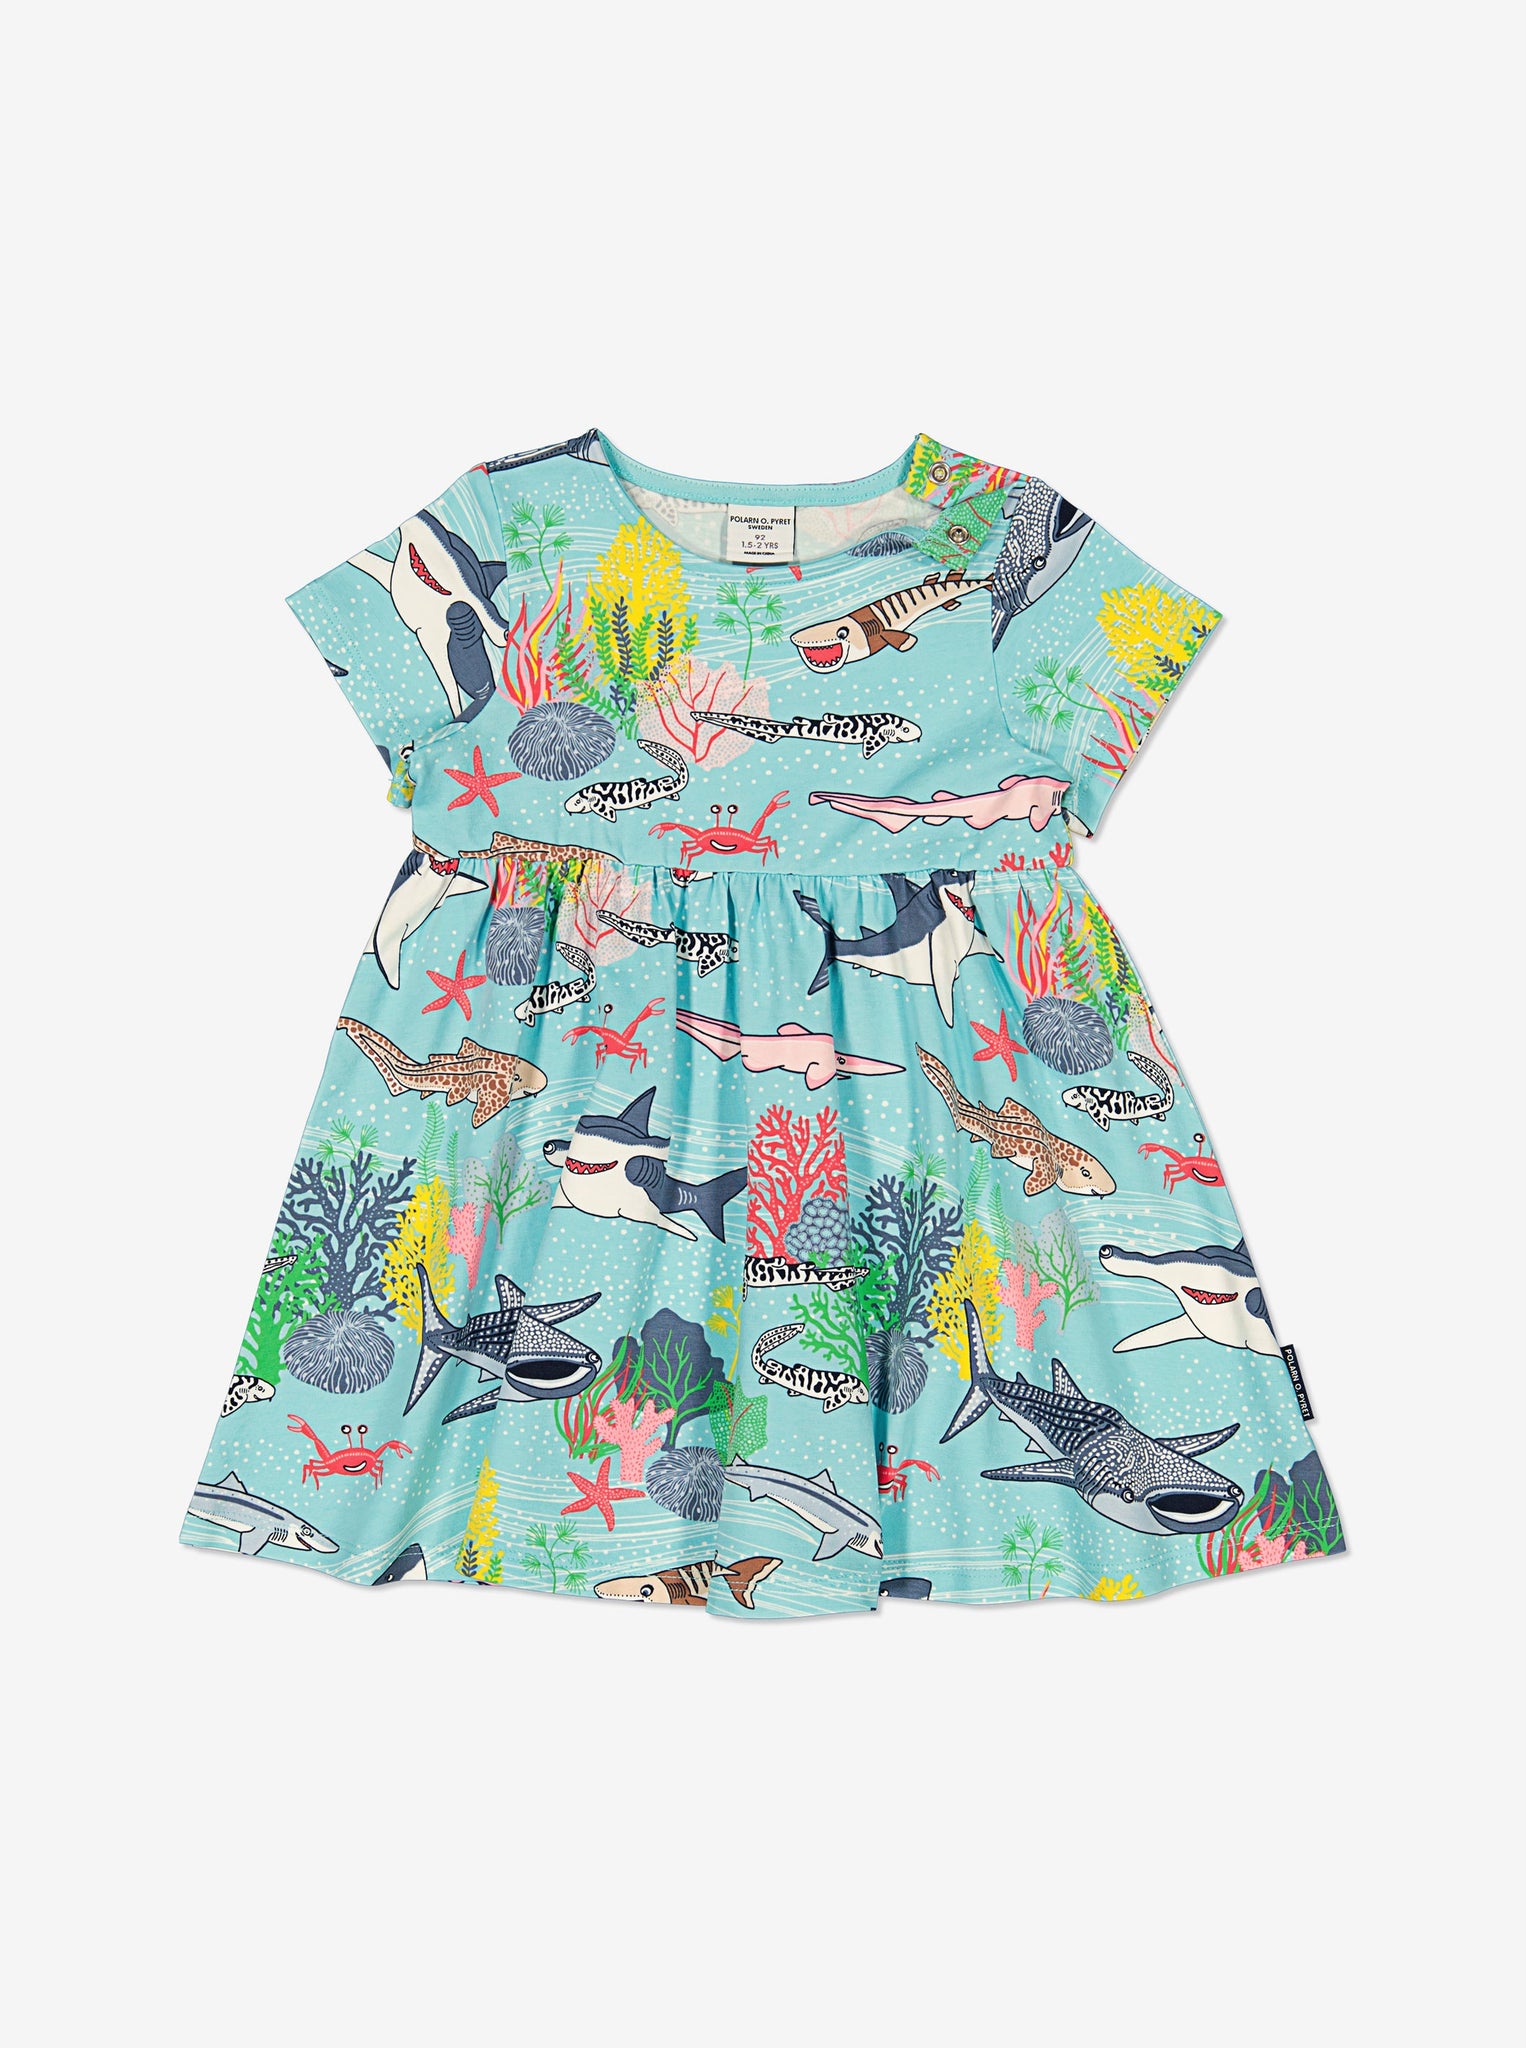 Sealife Print Girls Dress from Polarn O. Pyret Kidswear. Made using sustainable sourced materials.